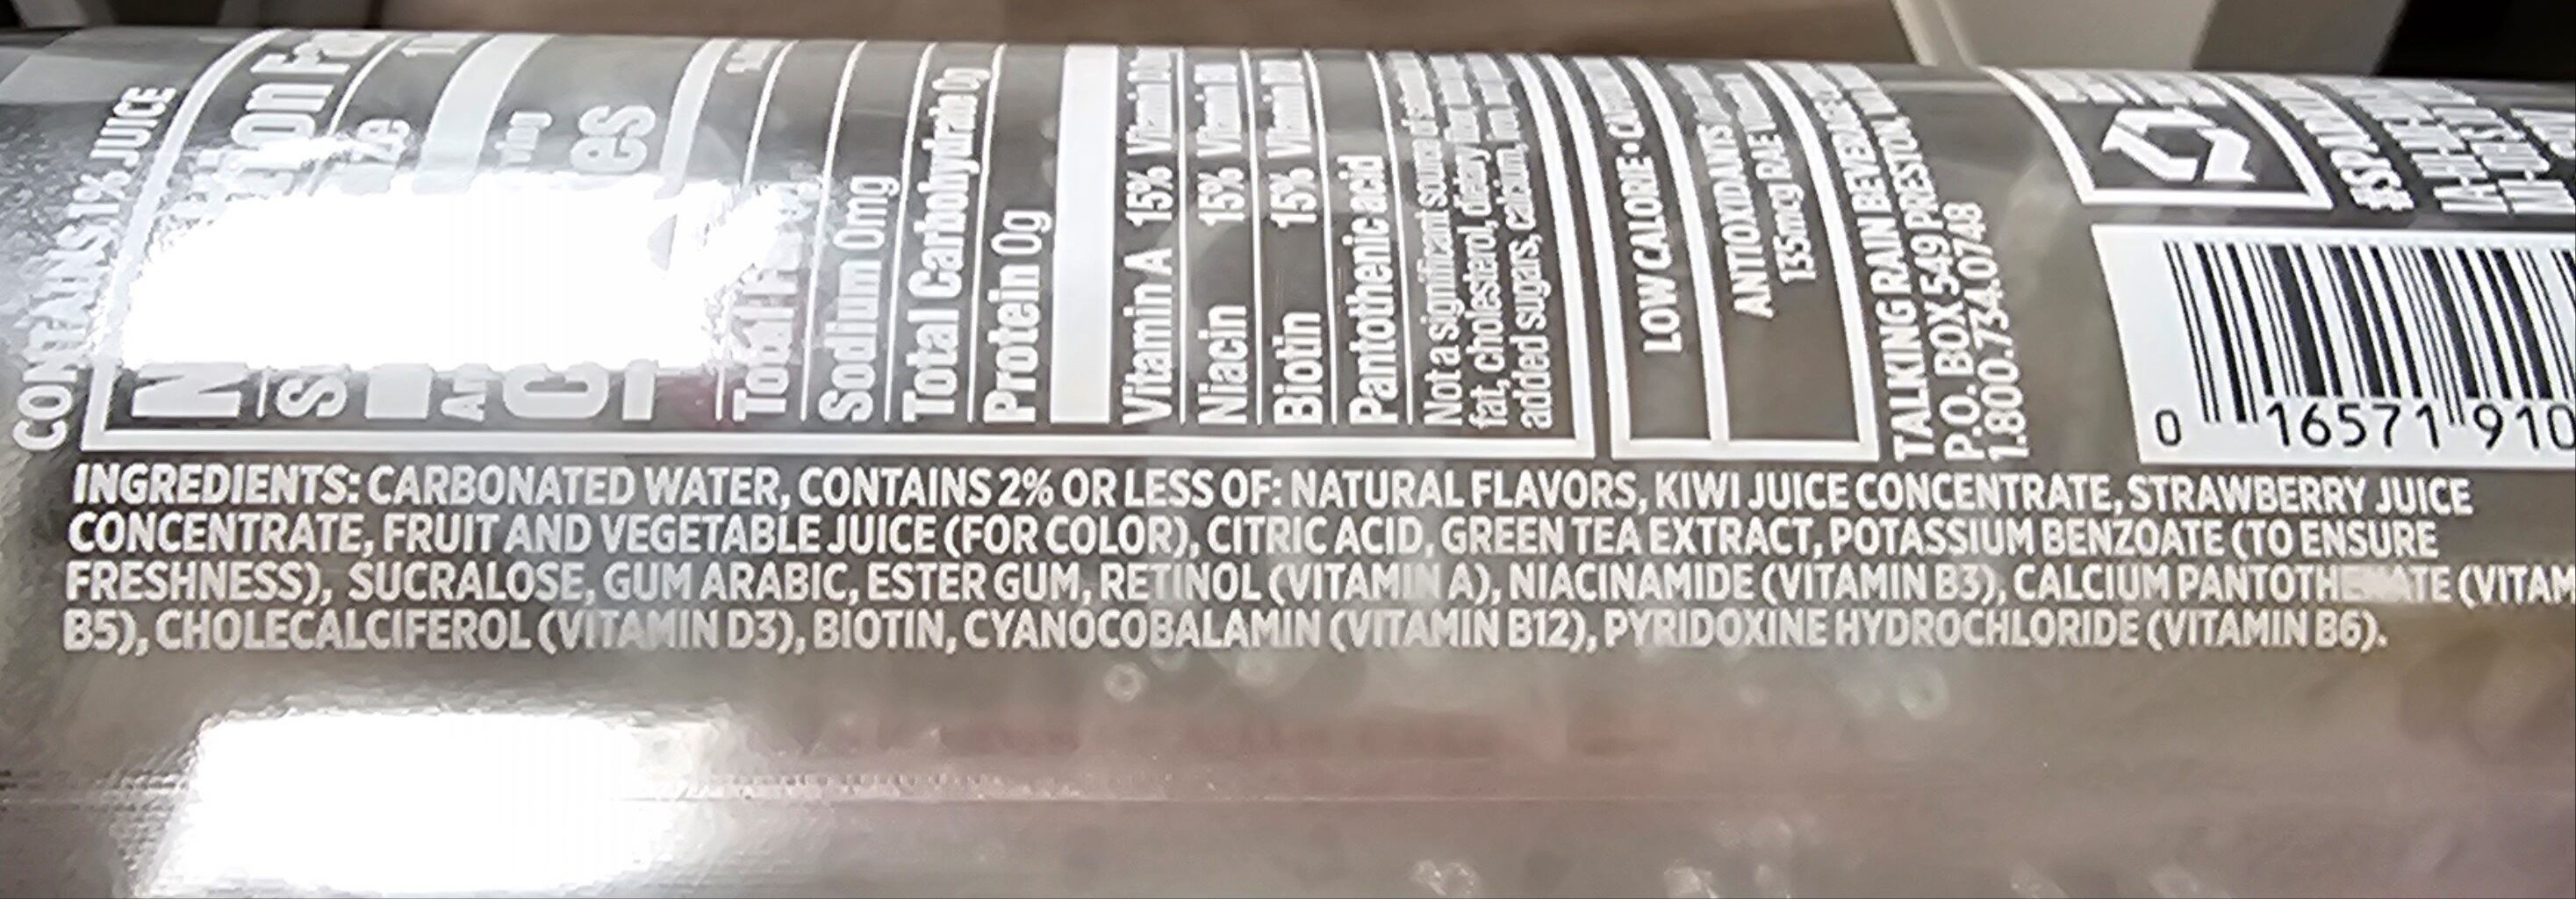 Kiwi strawberry flavored sparkling water - Nutrition facts